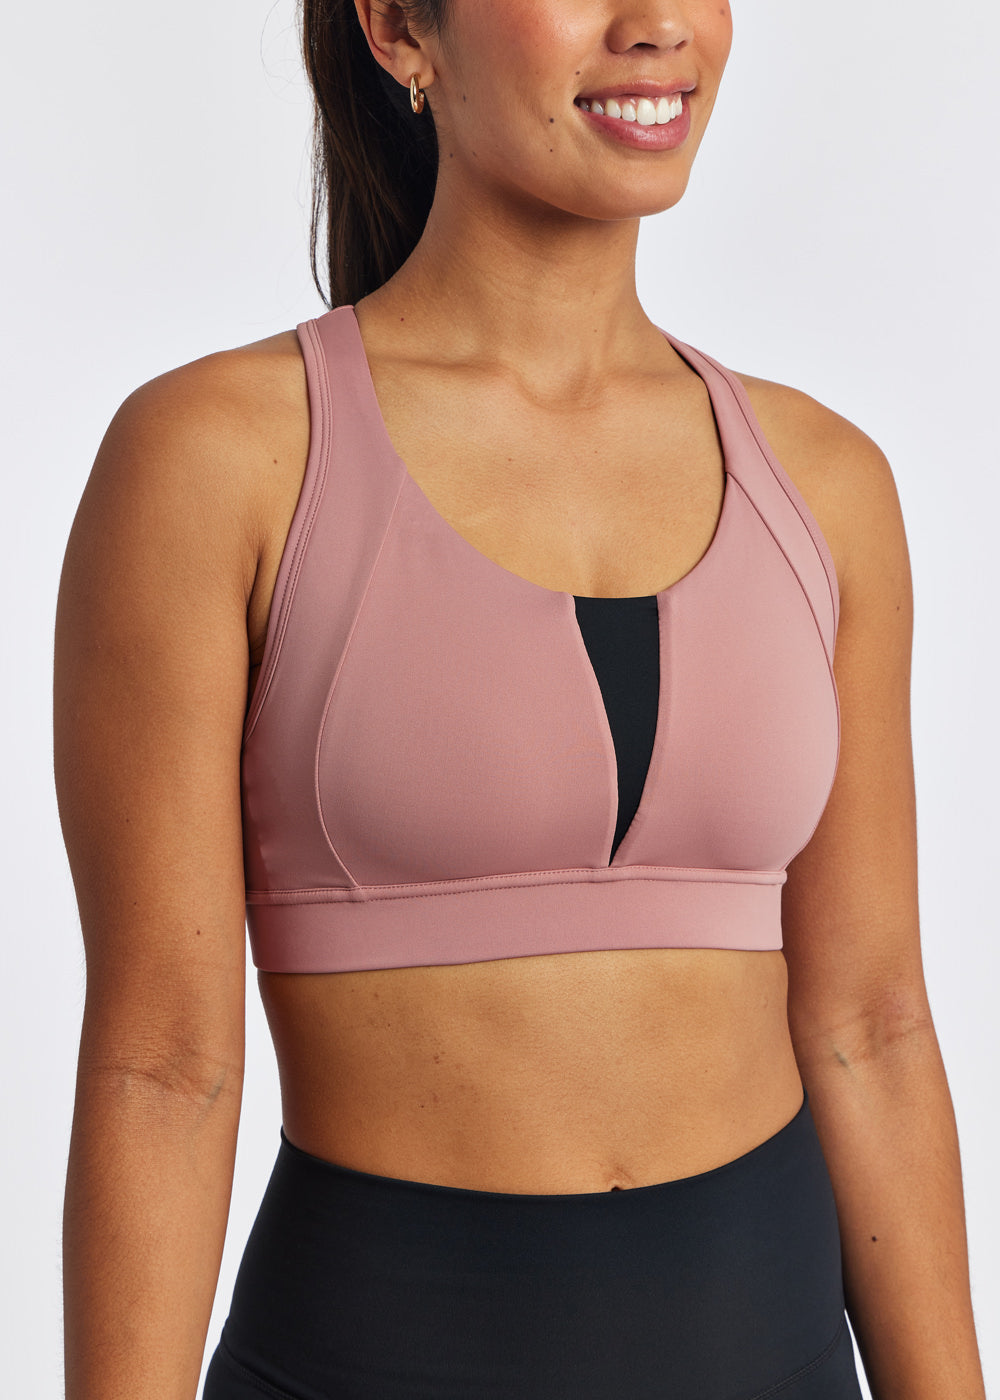 This sports bra is amazing from @Stella Leah !! Its super comfortable